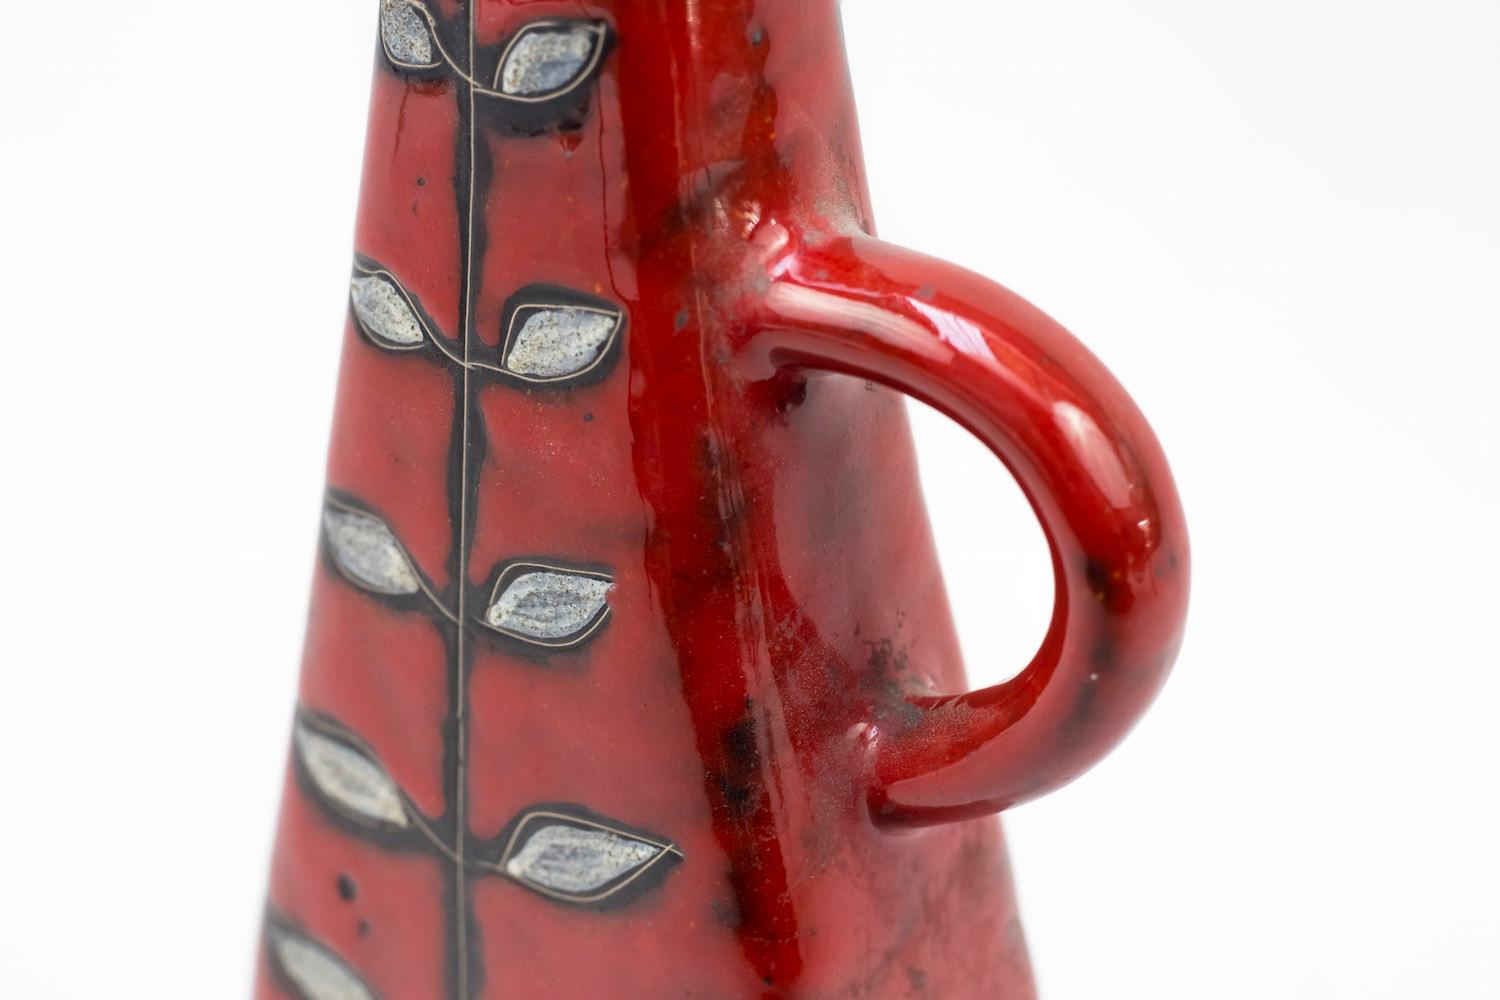 Hand-Painted Bud Vase in Red Earthenware, 1950s